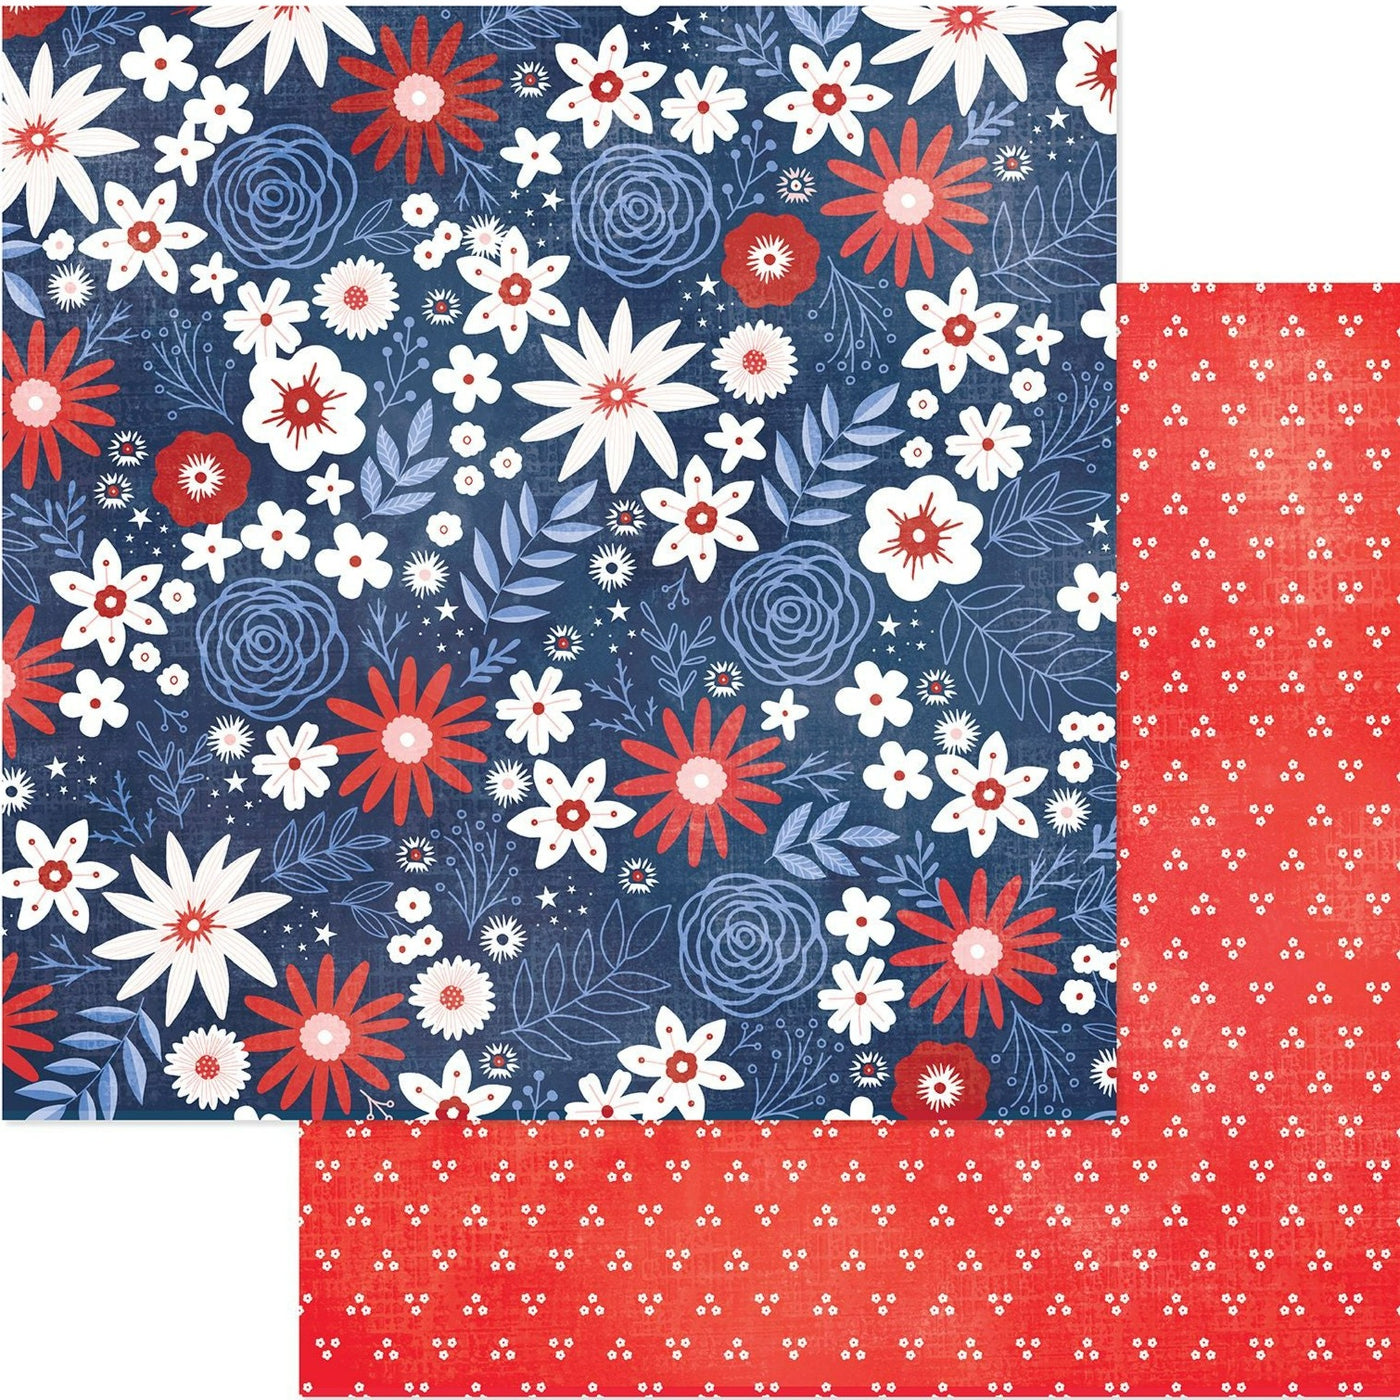 12x12 double-sided patterned paper. (Side A - red, white, and blue floral on a navy blue background. Side B - three white dot triangle pattern on a red background) - American Crafts